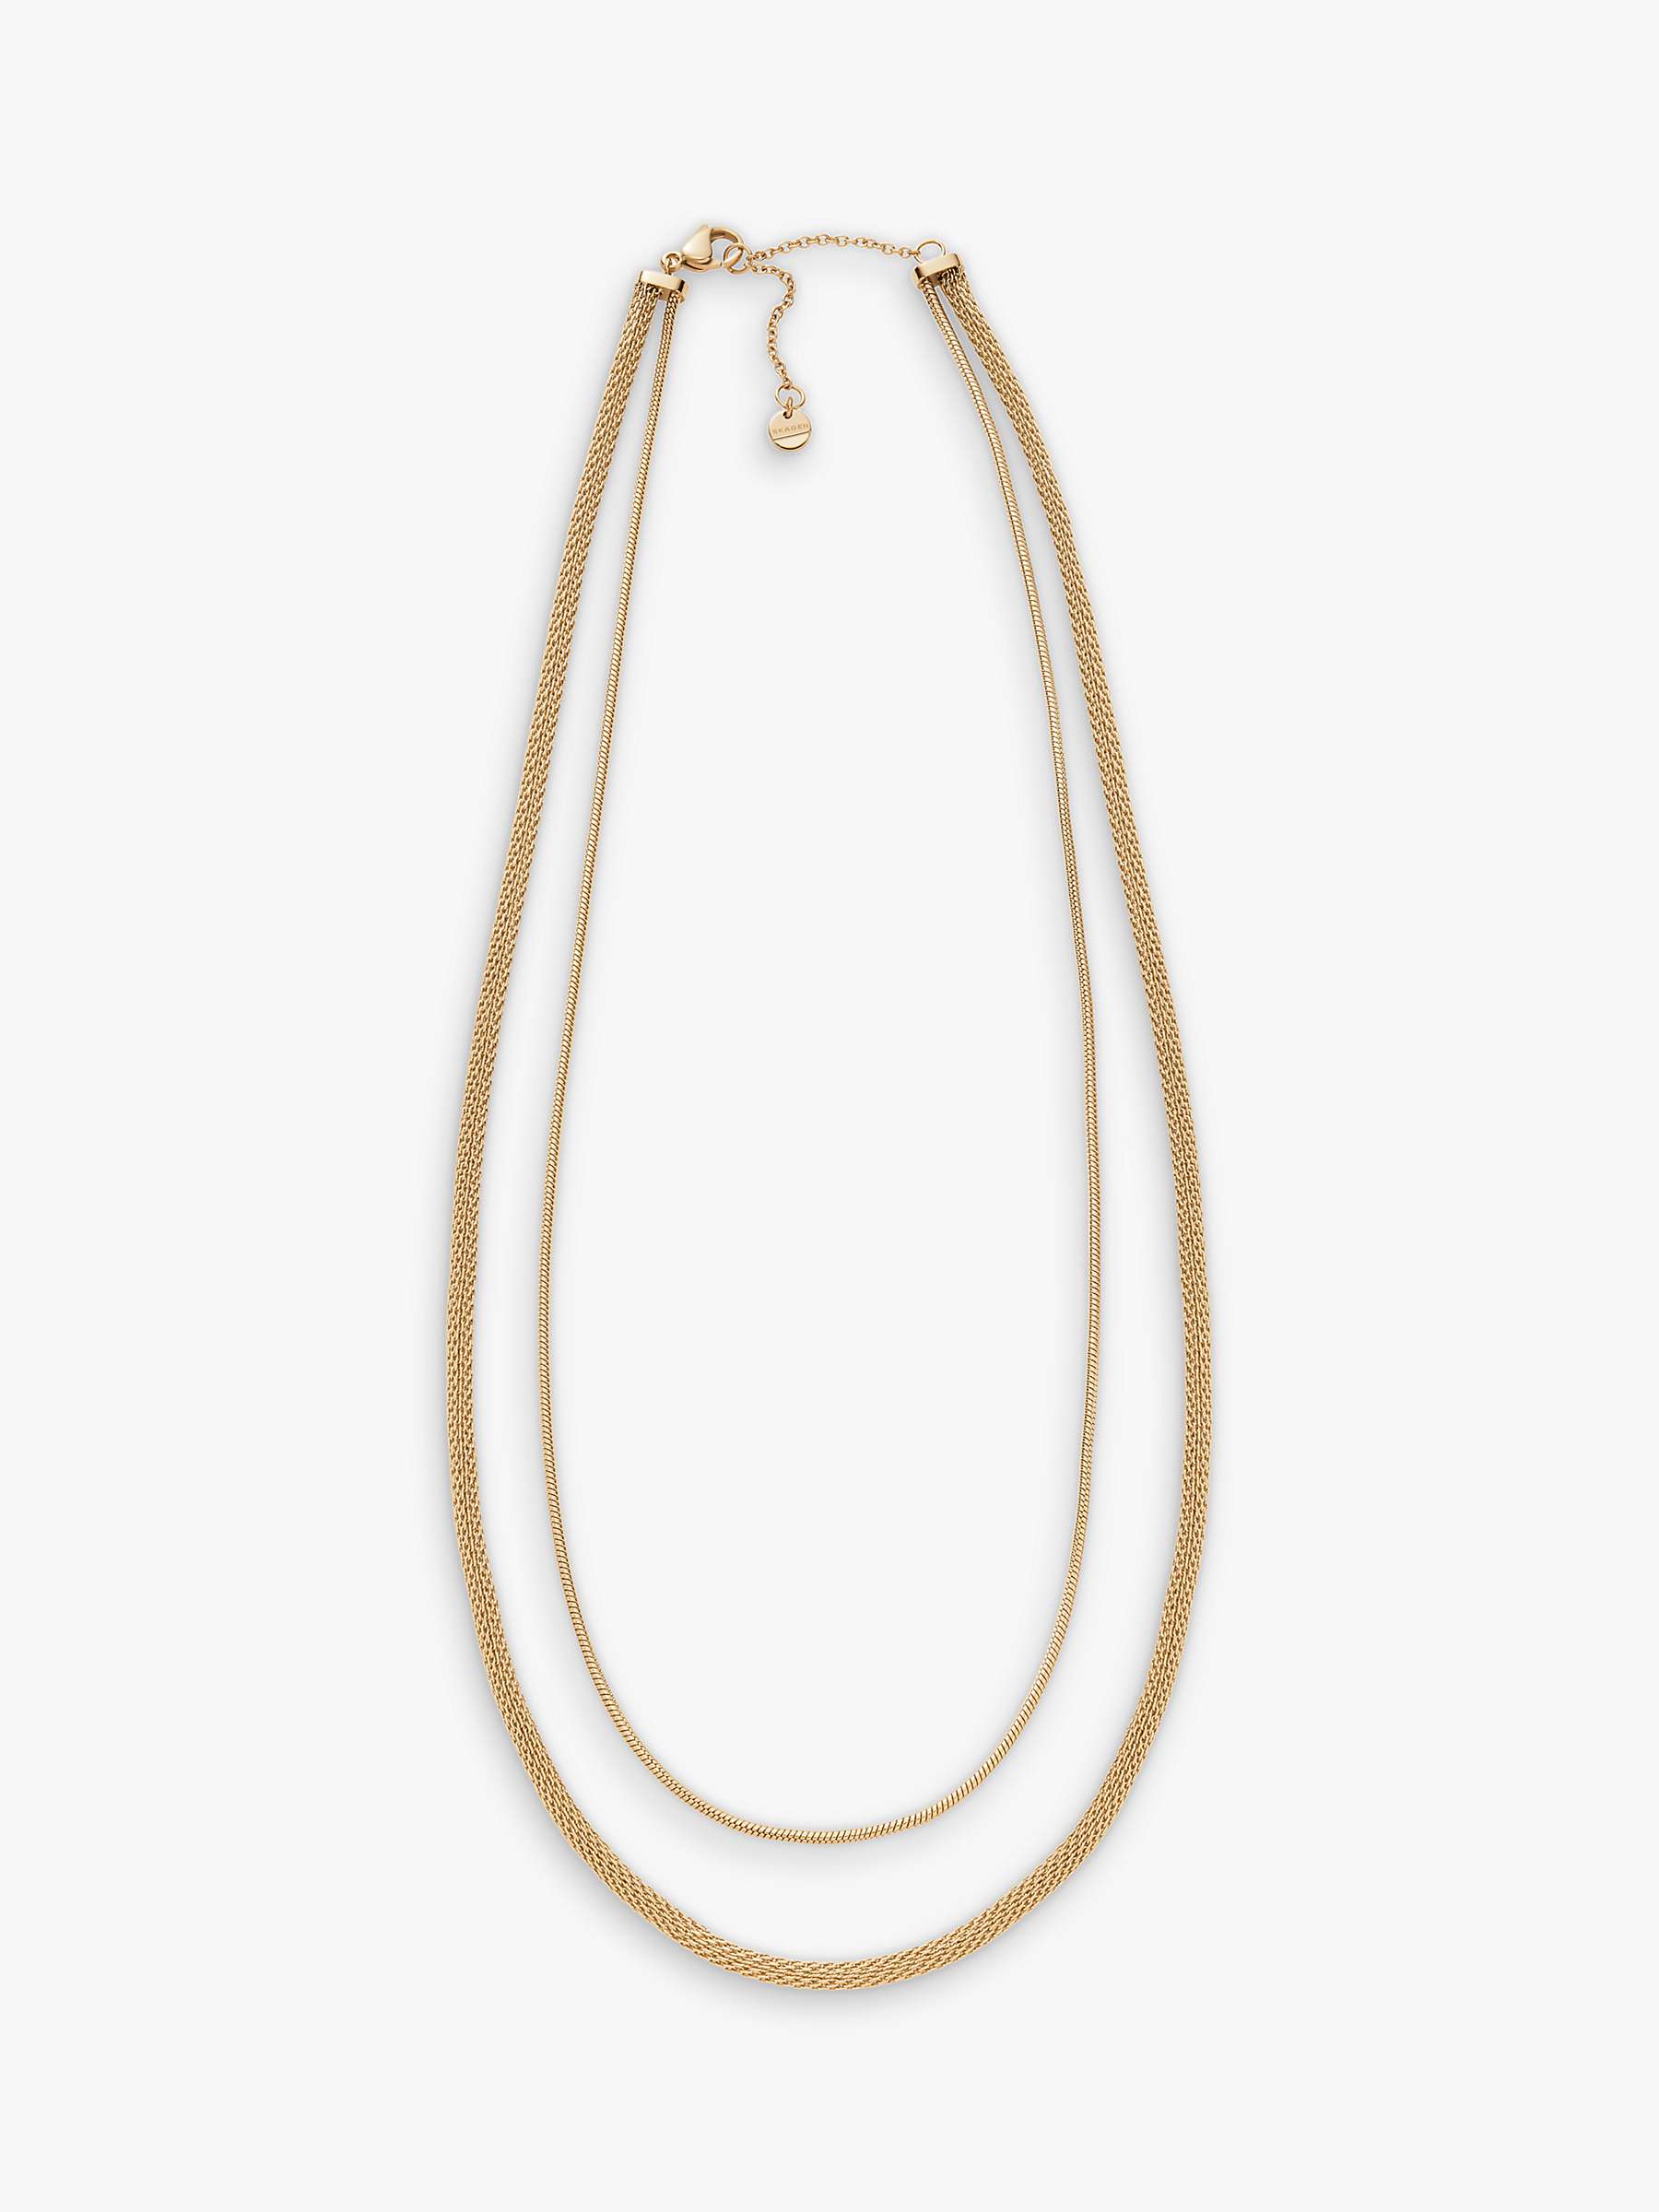 Buy Skagen Layered Chain Necklace, Gold Online at johnlewis.com